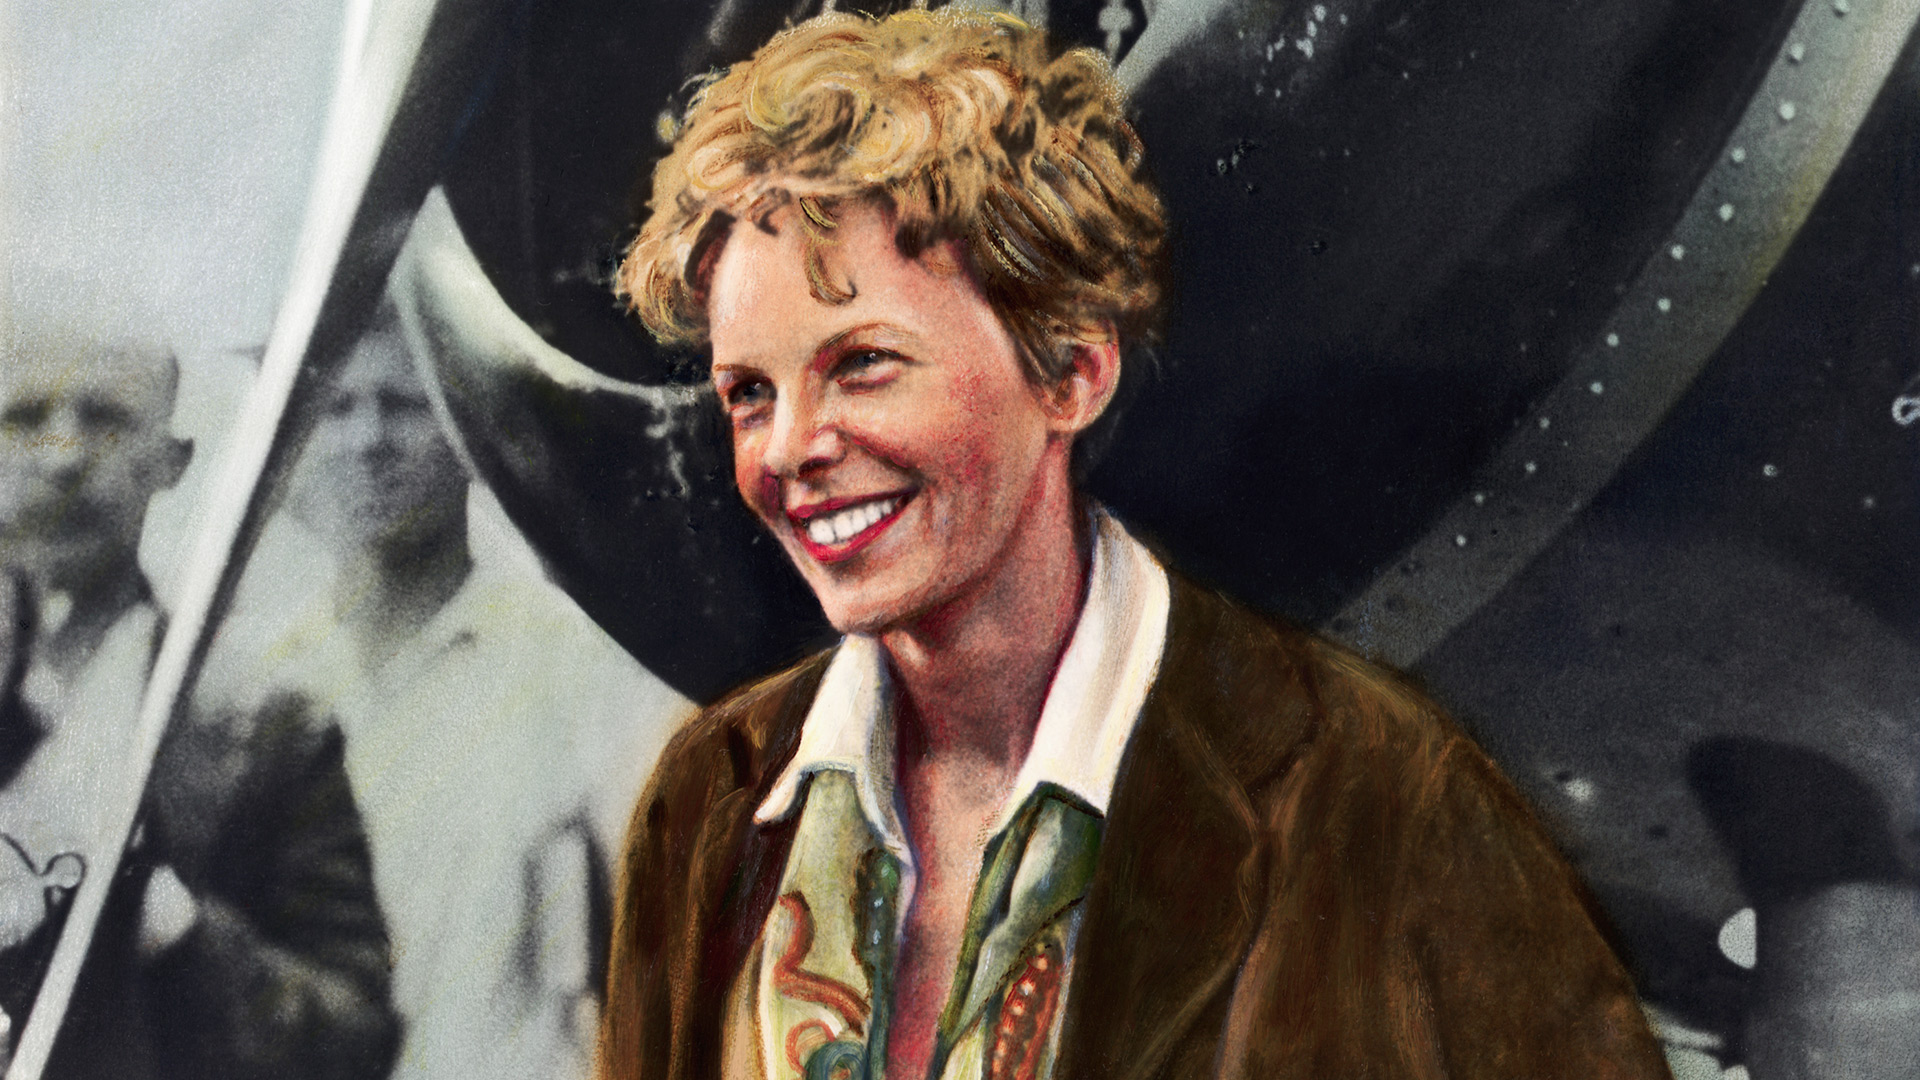 August 24, 1932: Amelia Earhart Was the First Woman to Fly Non-Stop Across America